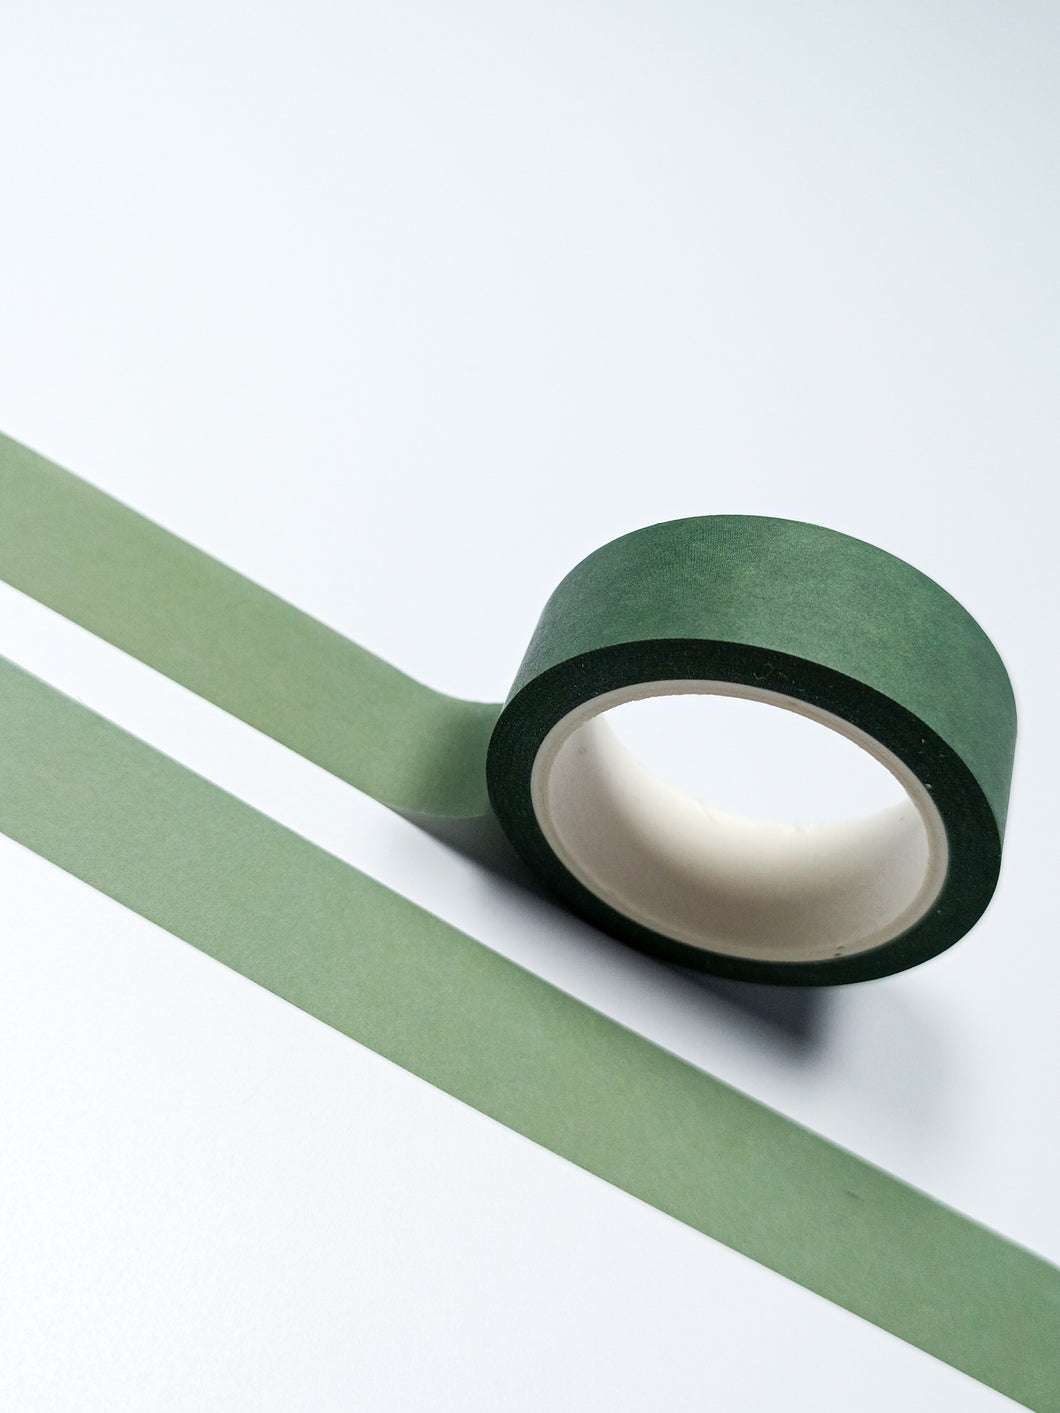 A roll of Minimal Dark Olive Green Plain Washi Tape by GretelCreates on a white surface.